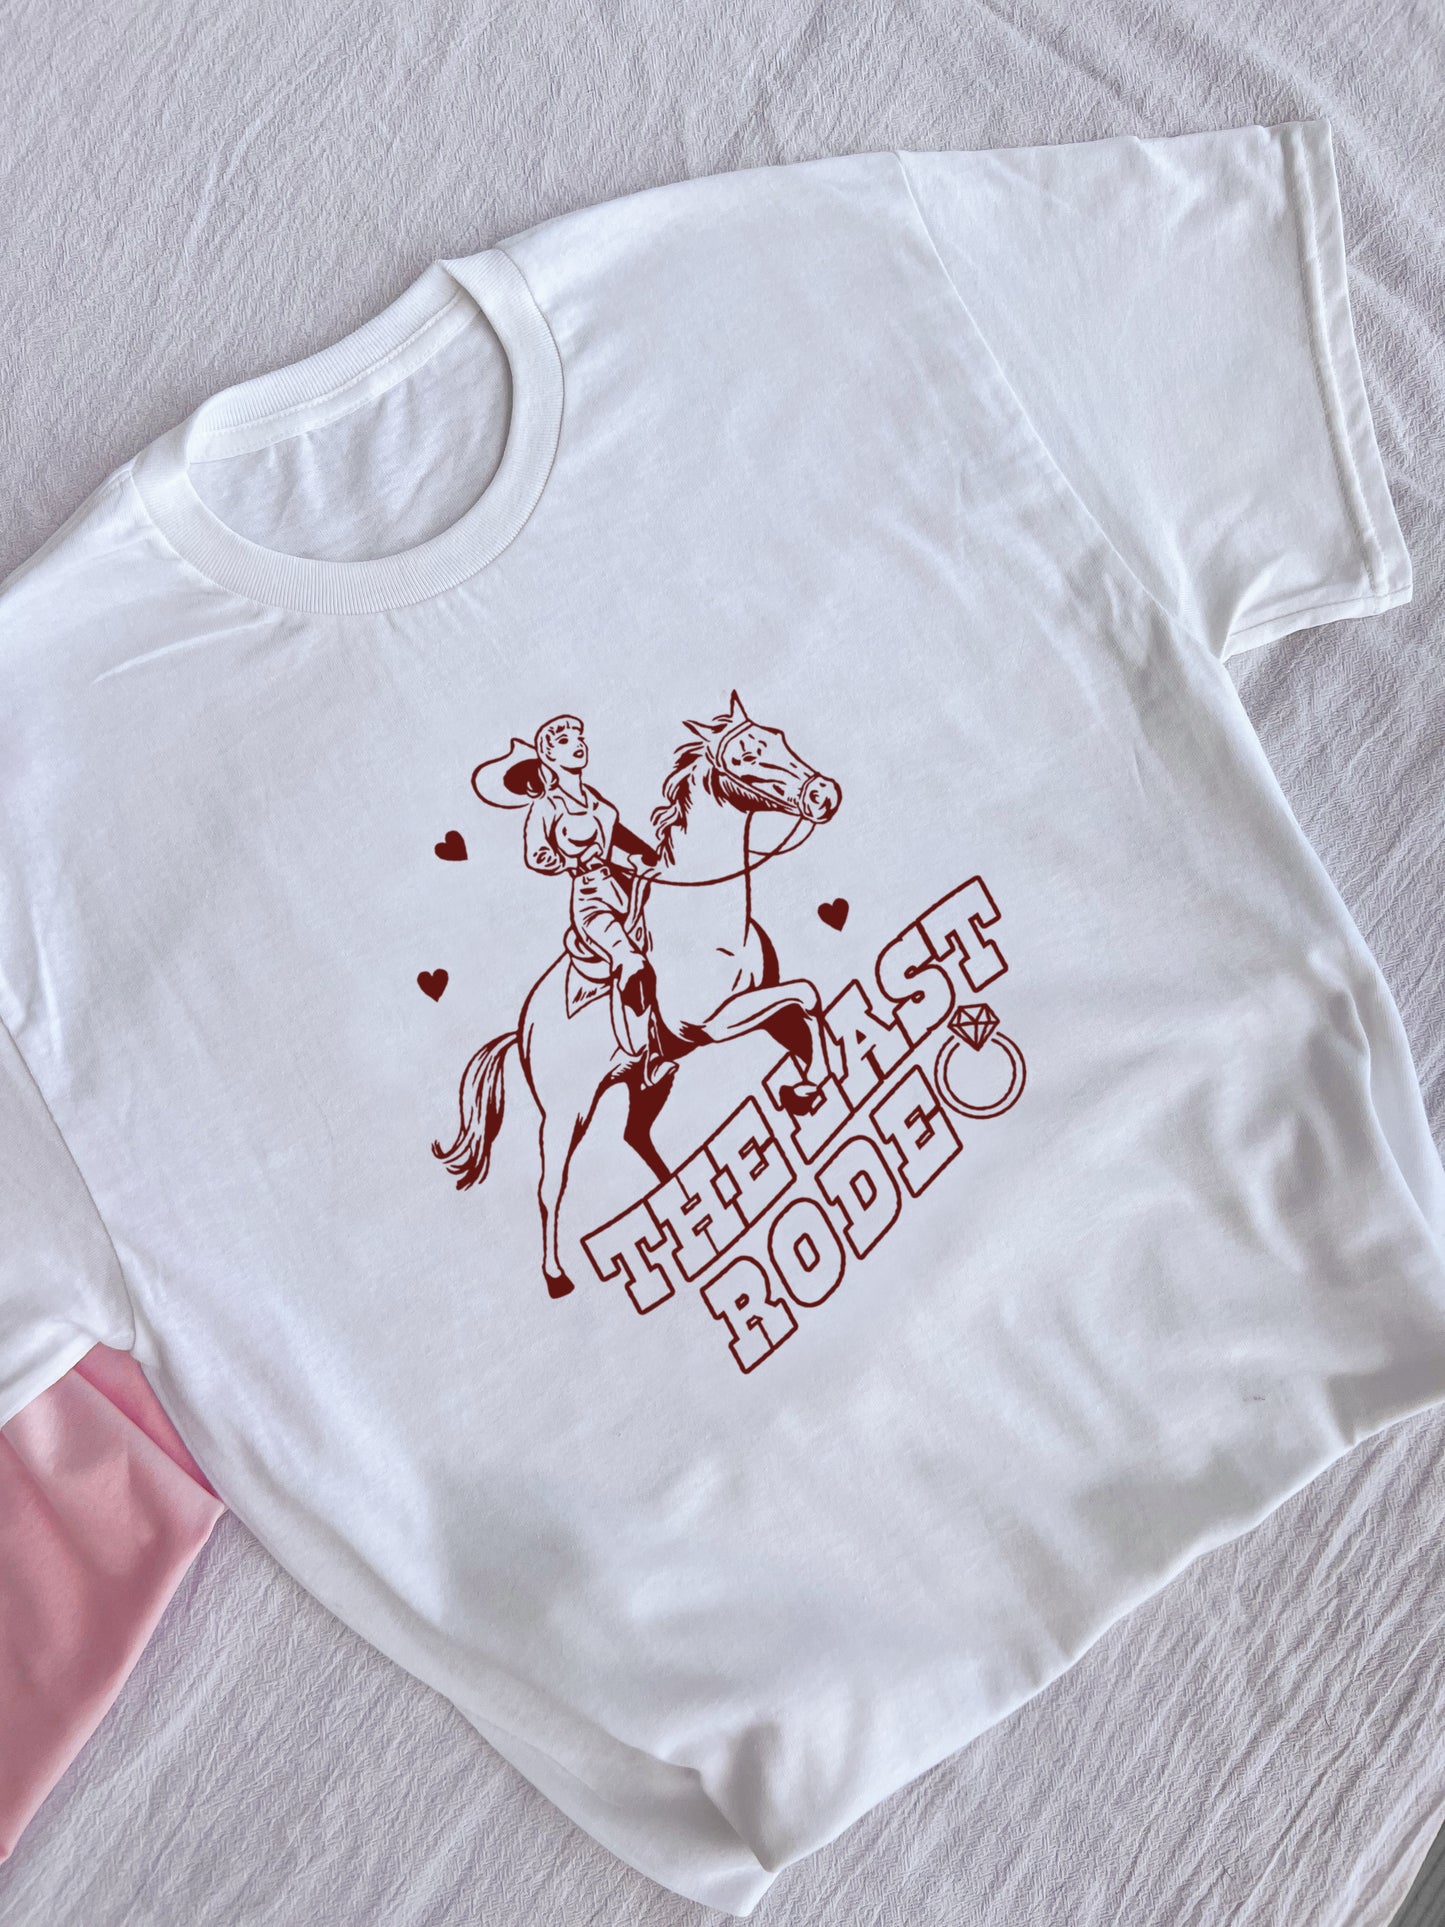 The Last Rodeo Bachelorette Party Tees